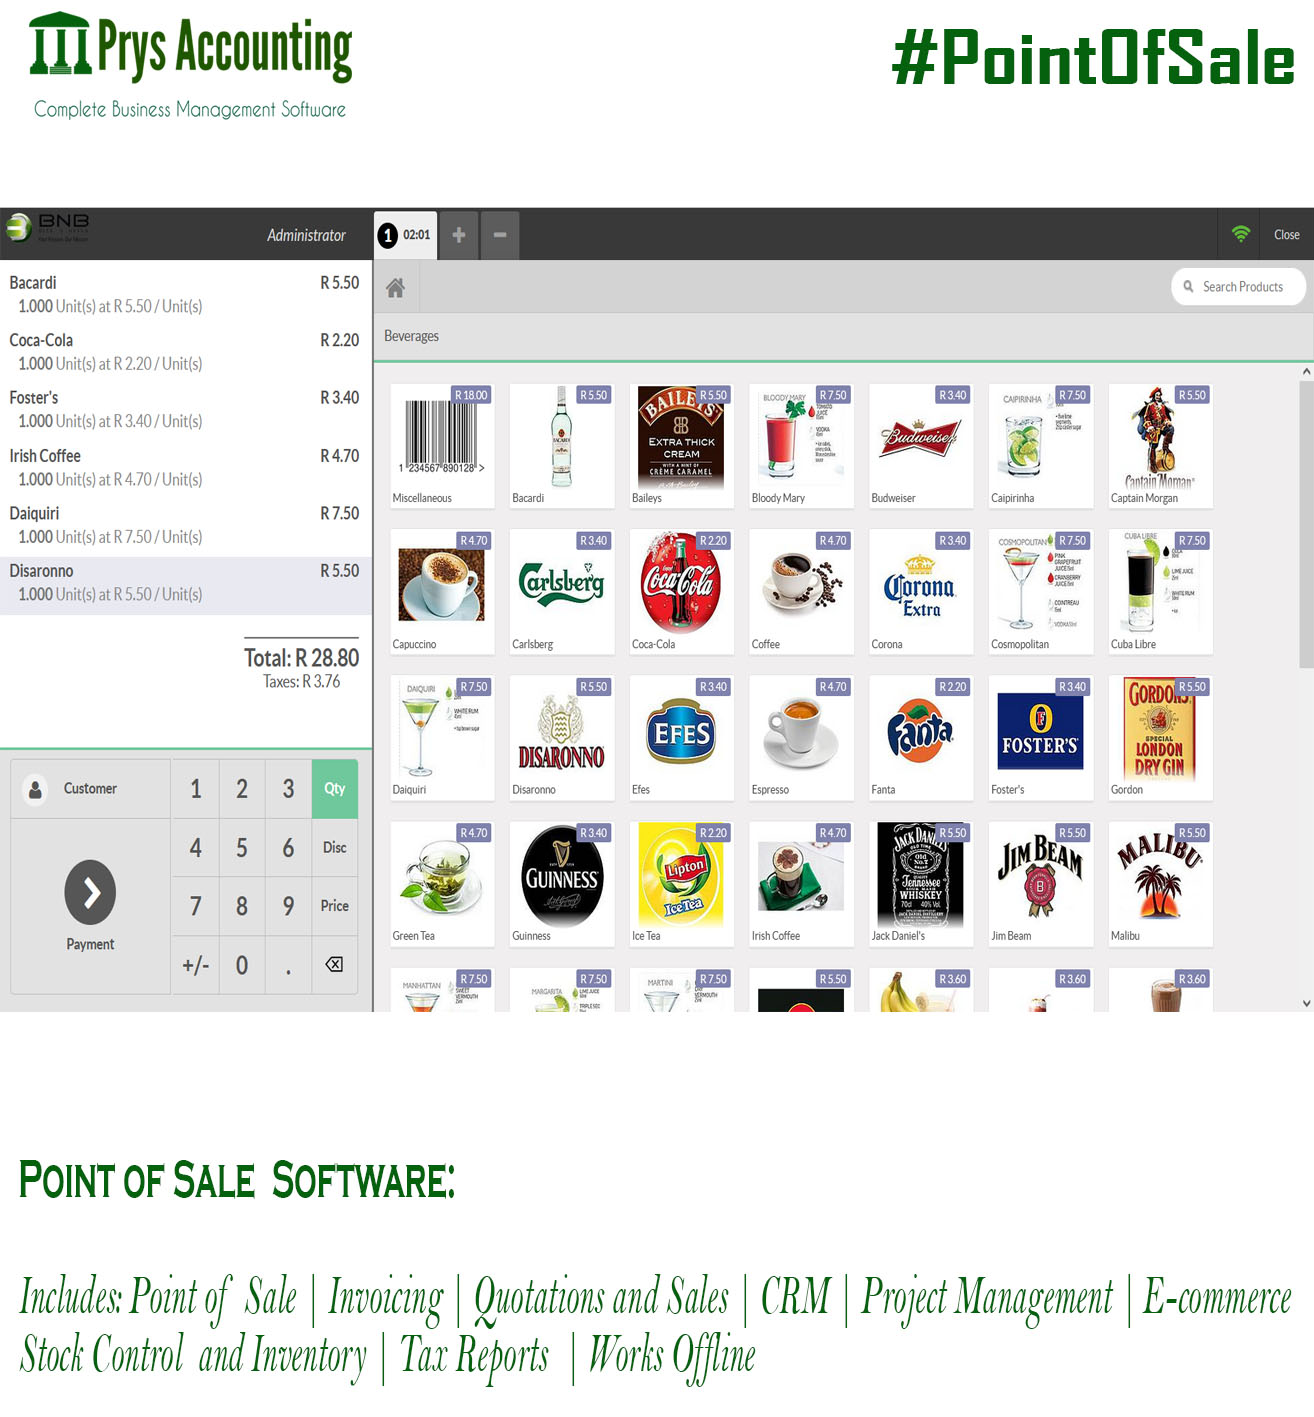 Point of Sale and Stock Control Software (Annual Subscription) #PointofSale